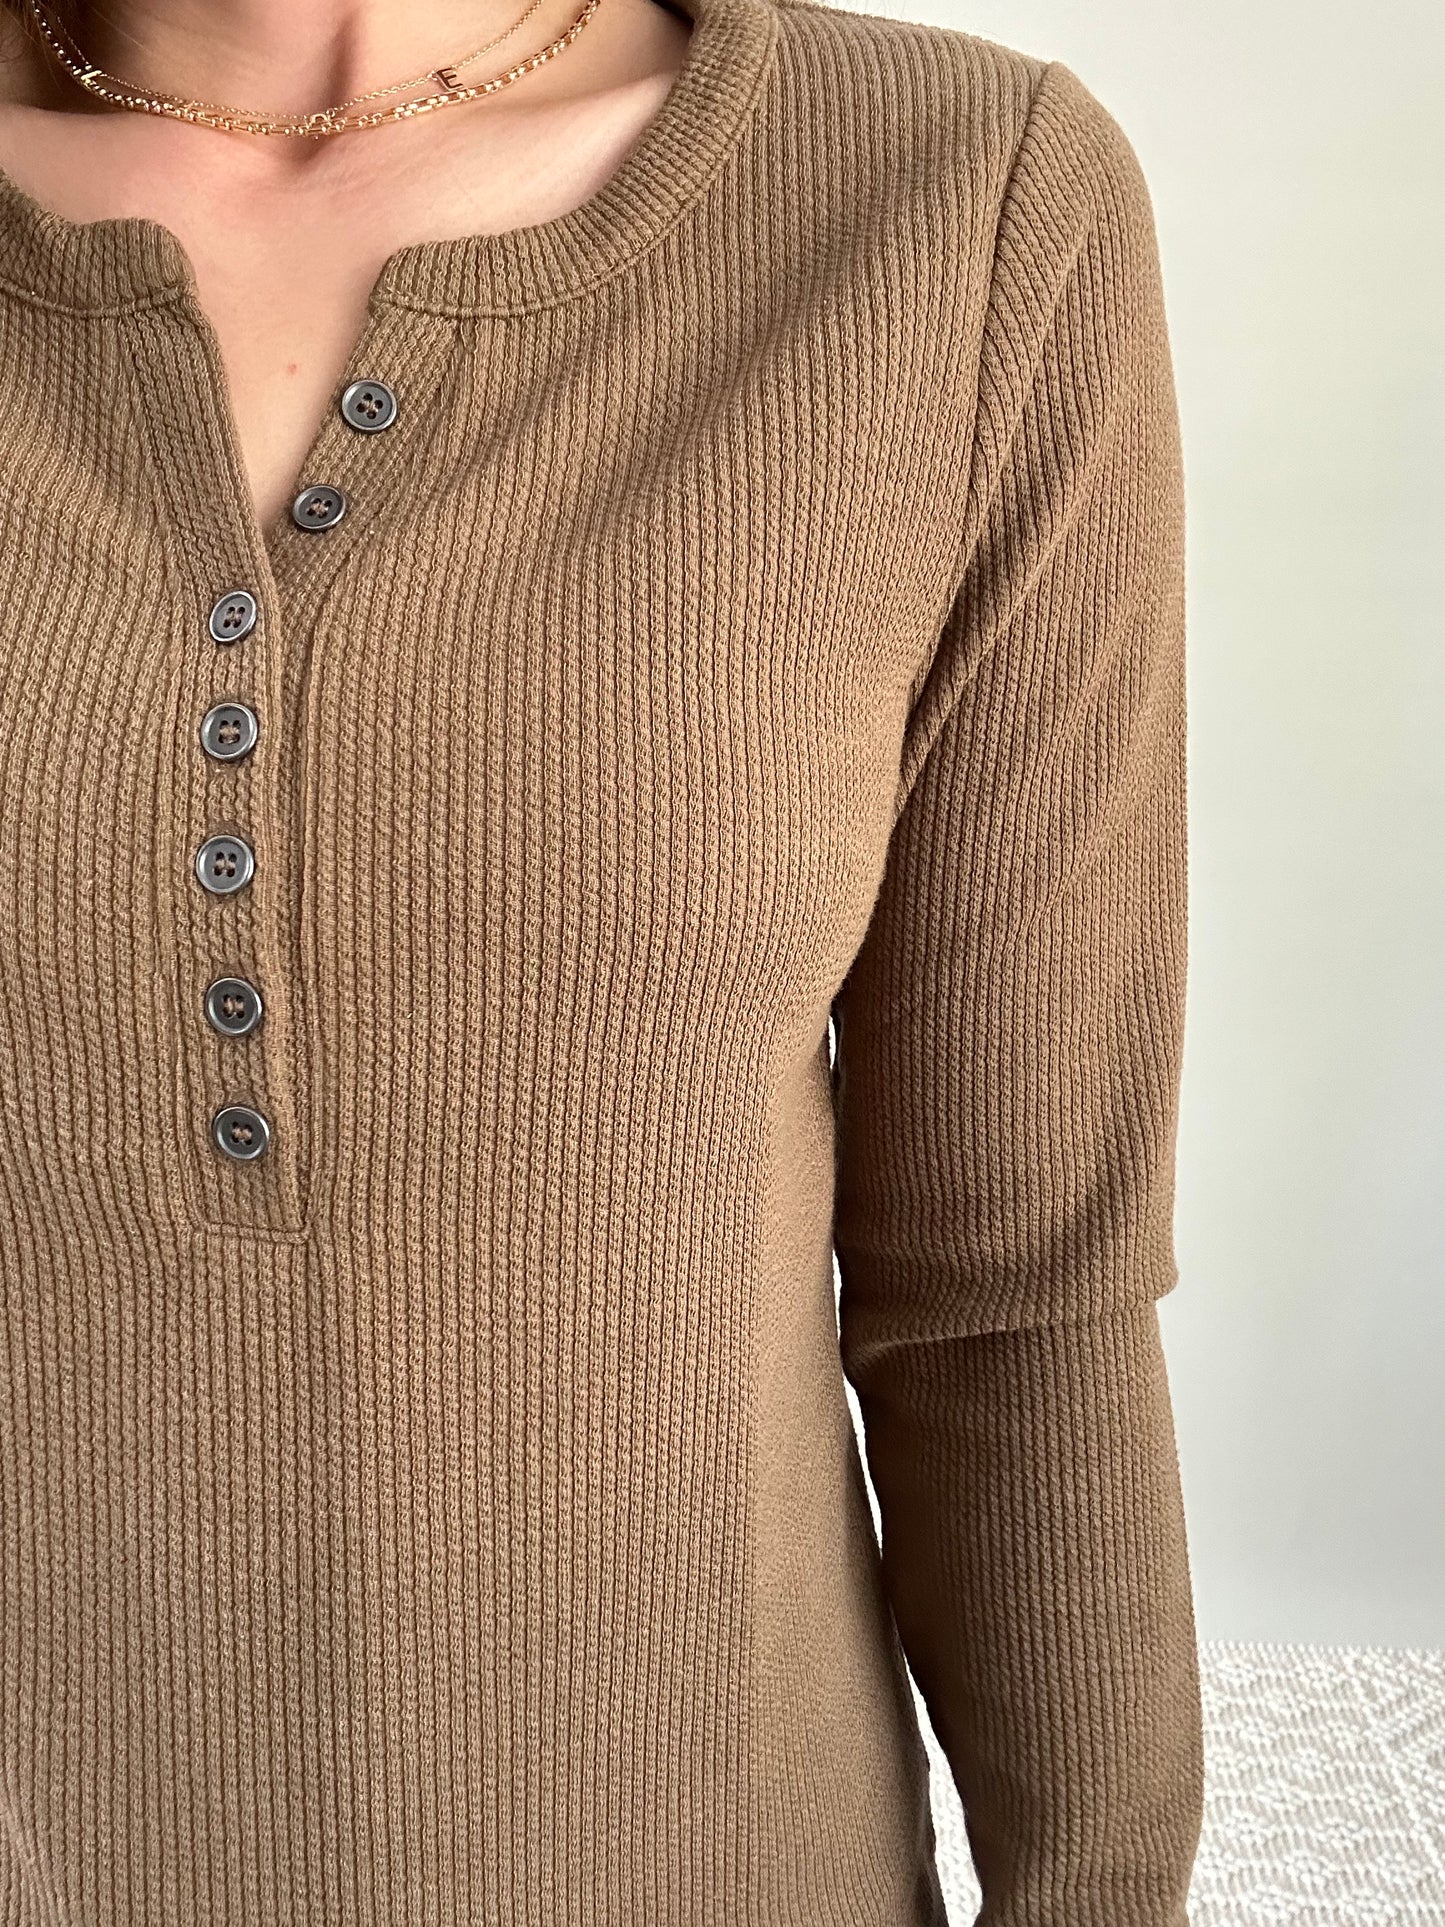 The Olivia Top - textured brown and olive long sleeve shirt great for layering